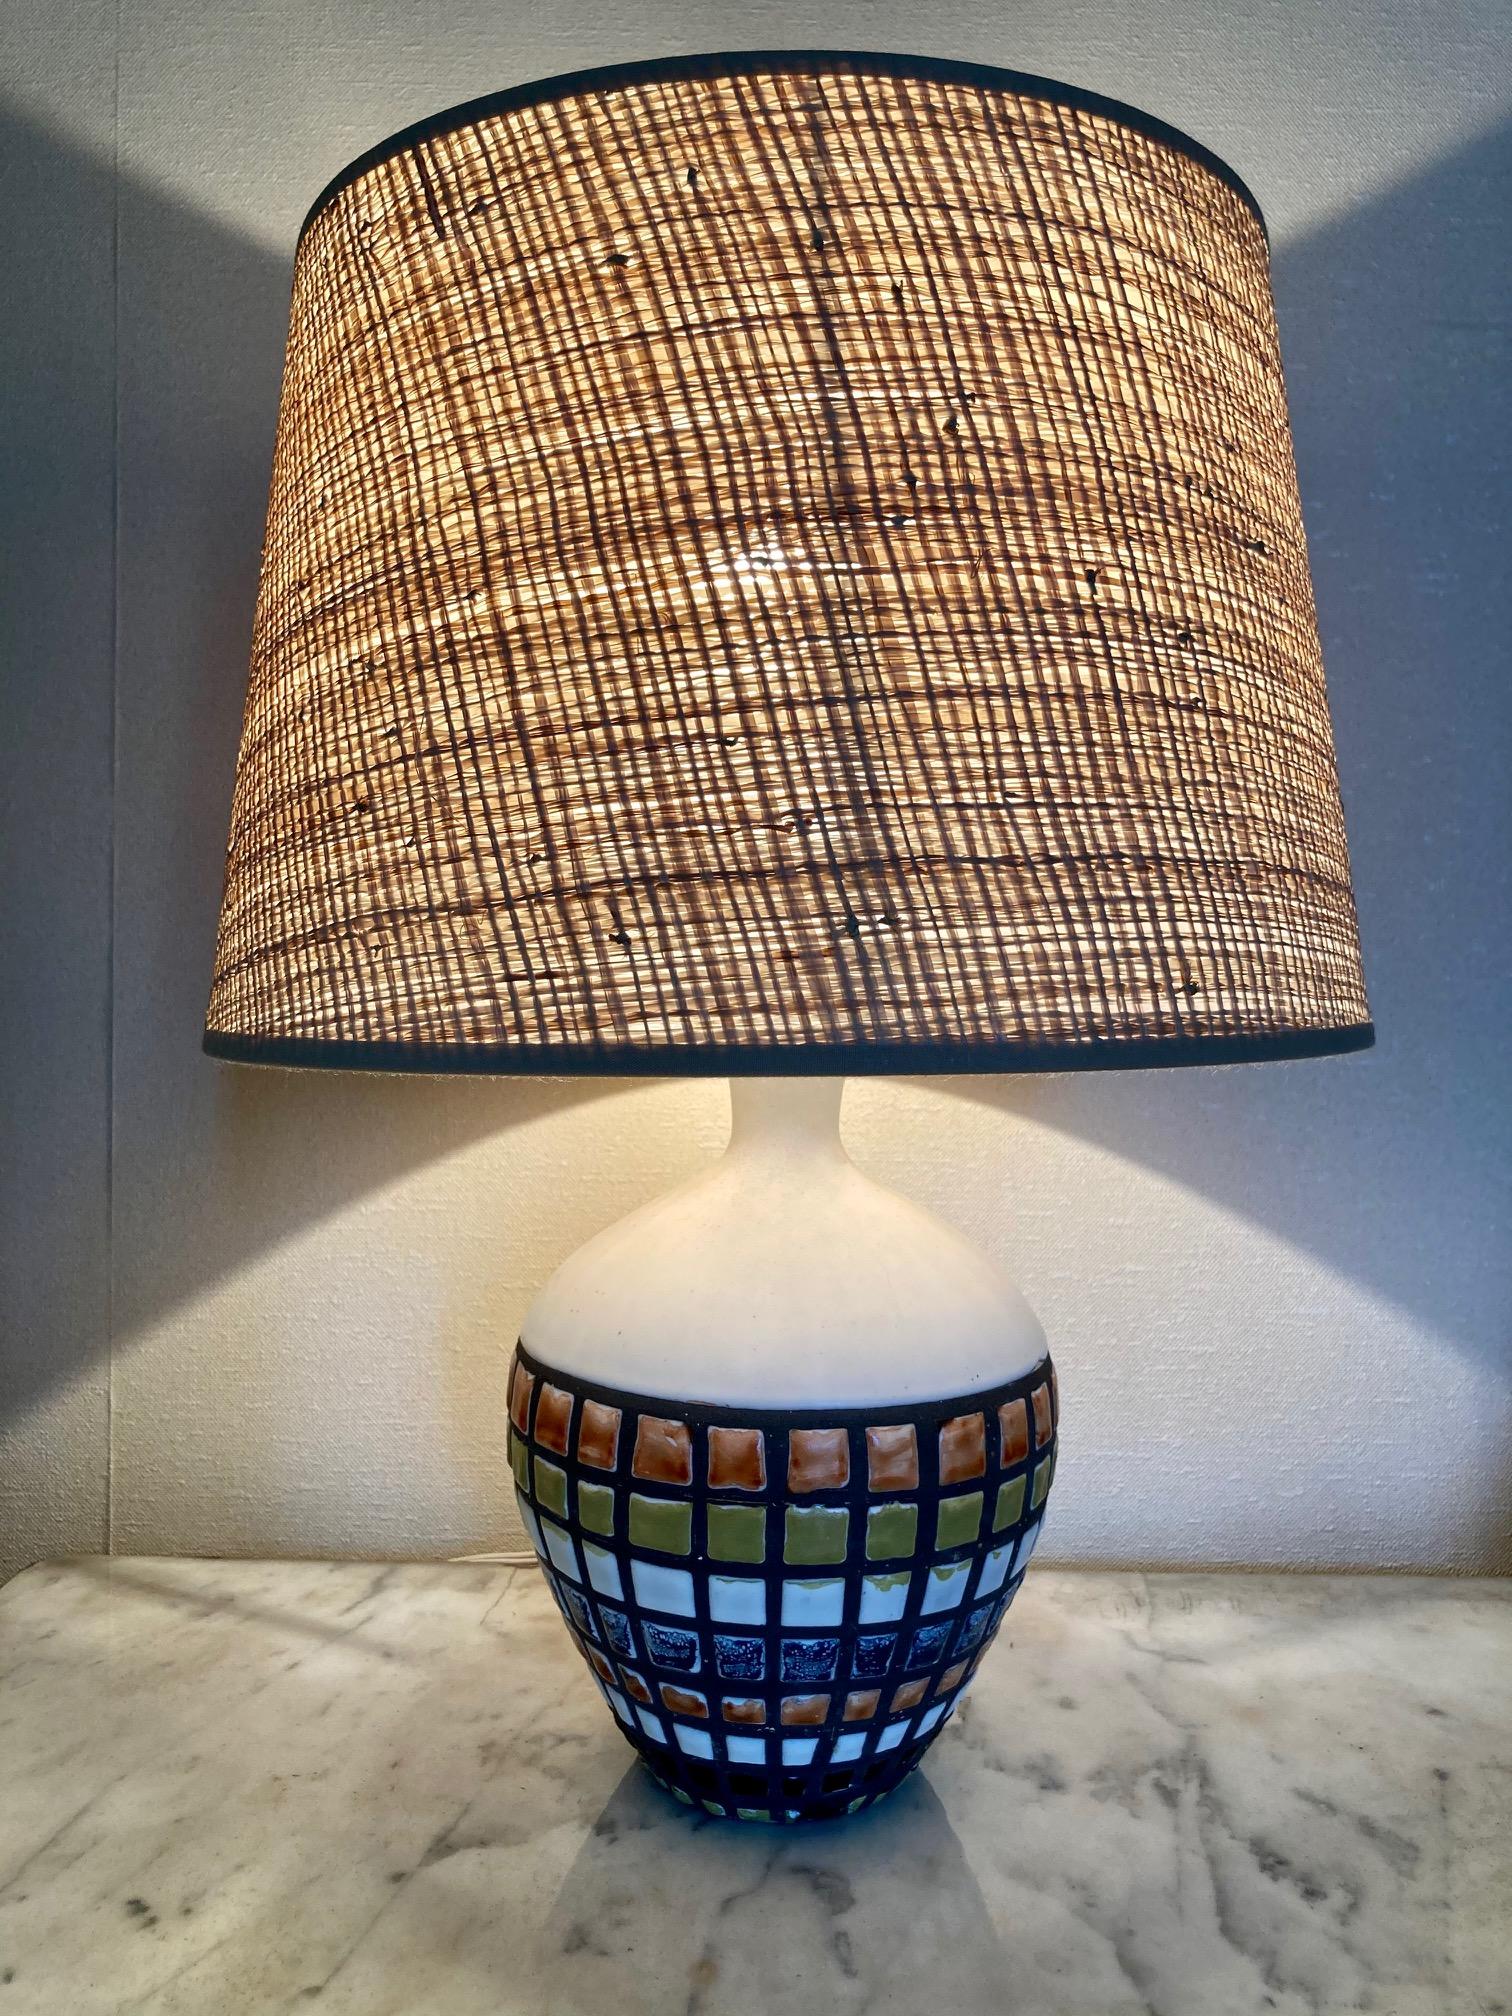 A bottle shape table lamp 
White enamelled ceramic with polychrome pavé design .
Roger Capron, Vallauris 1960.
signed Capron France B3
Vintage shade in excellent condition. 
Measures: Total height 40 cm, ( 15.8 inches )
Ceramic height 20 cm, (7.9